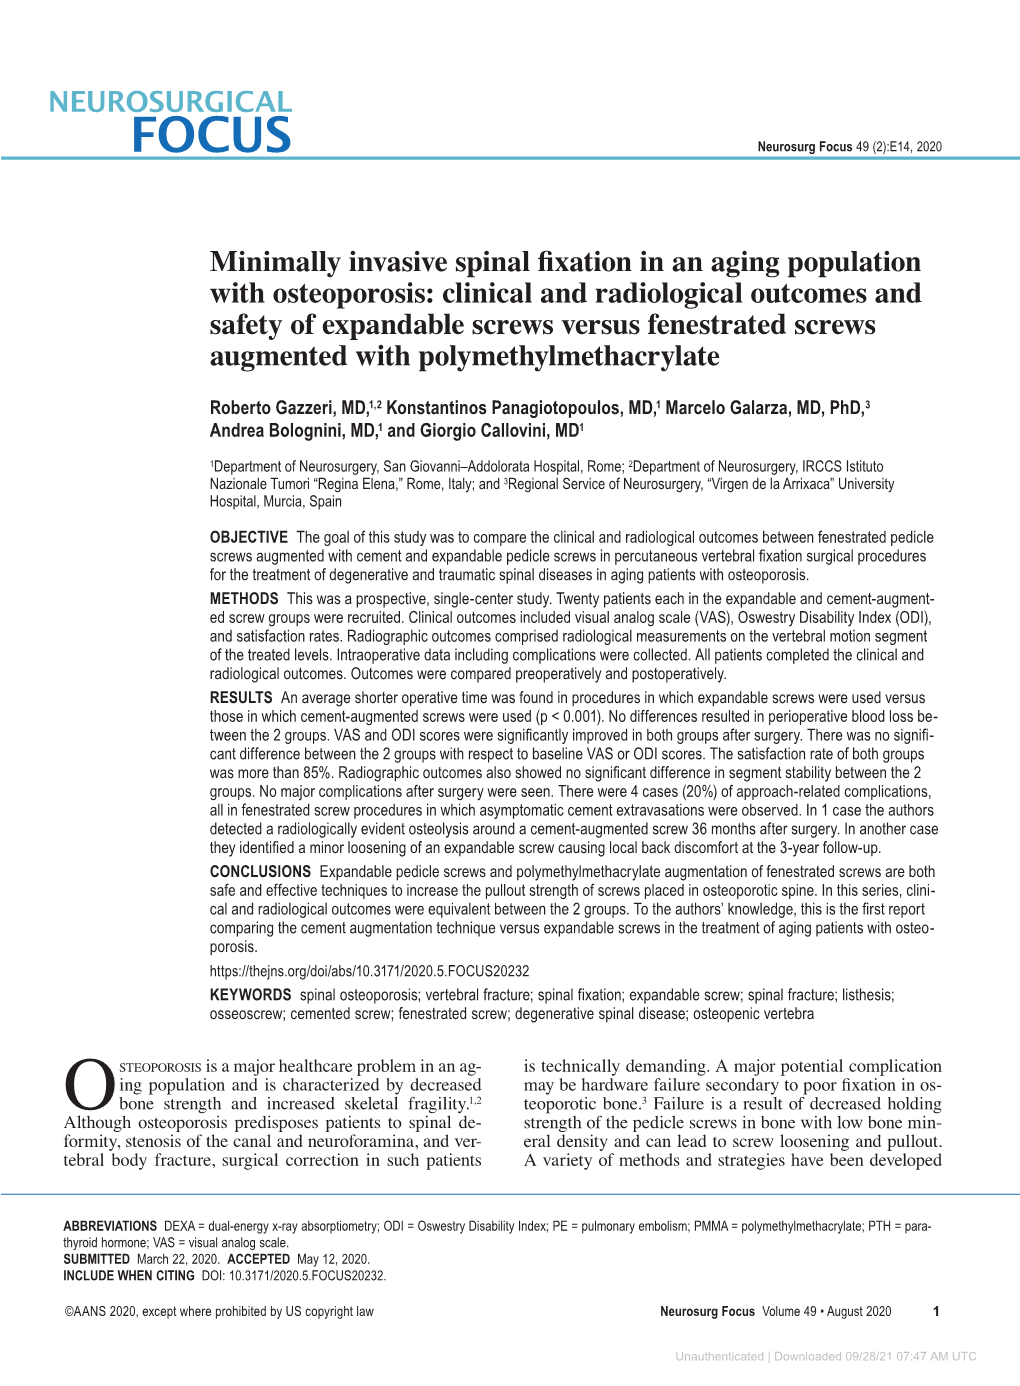 Minimally Invasive Spinal Fixation in an Aging Population with Osteoporosis